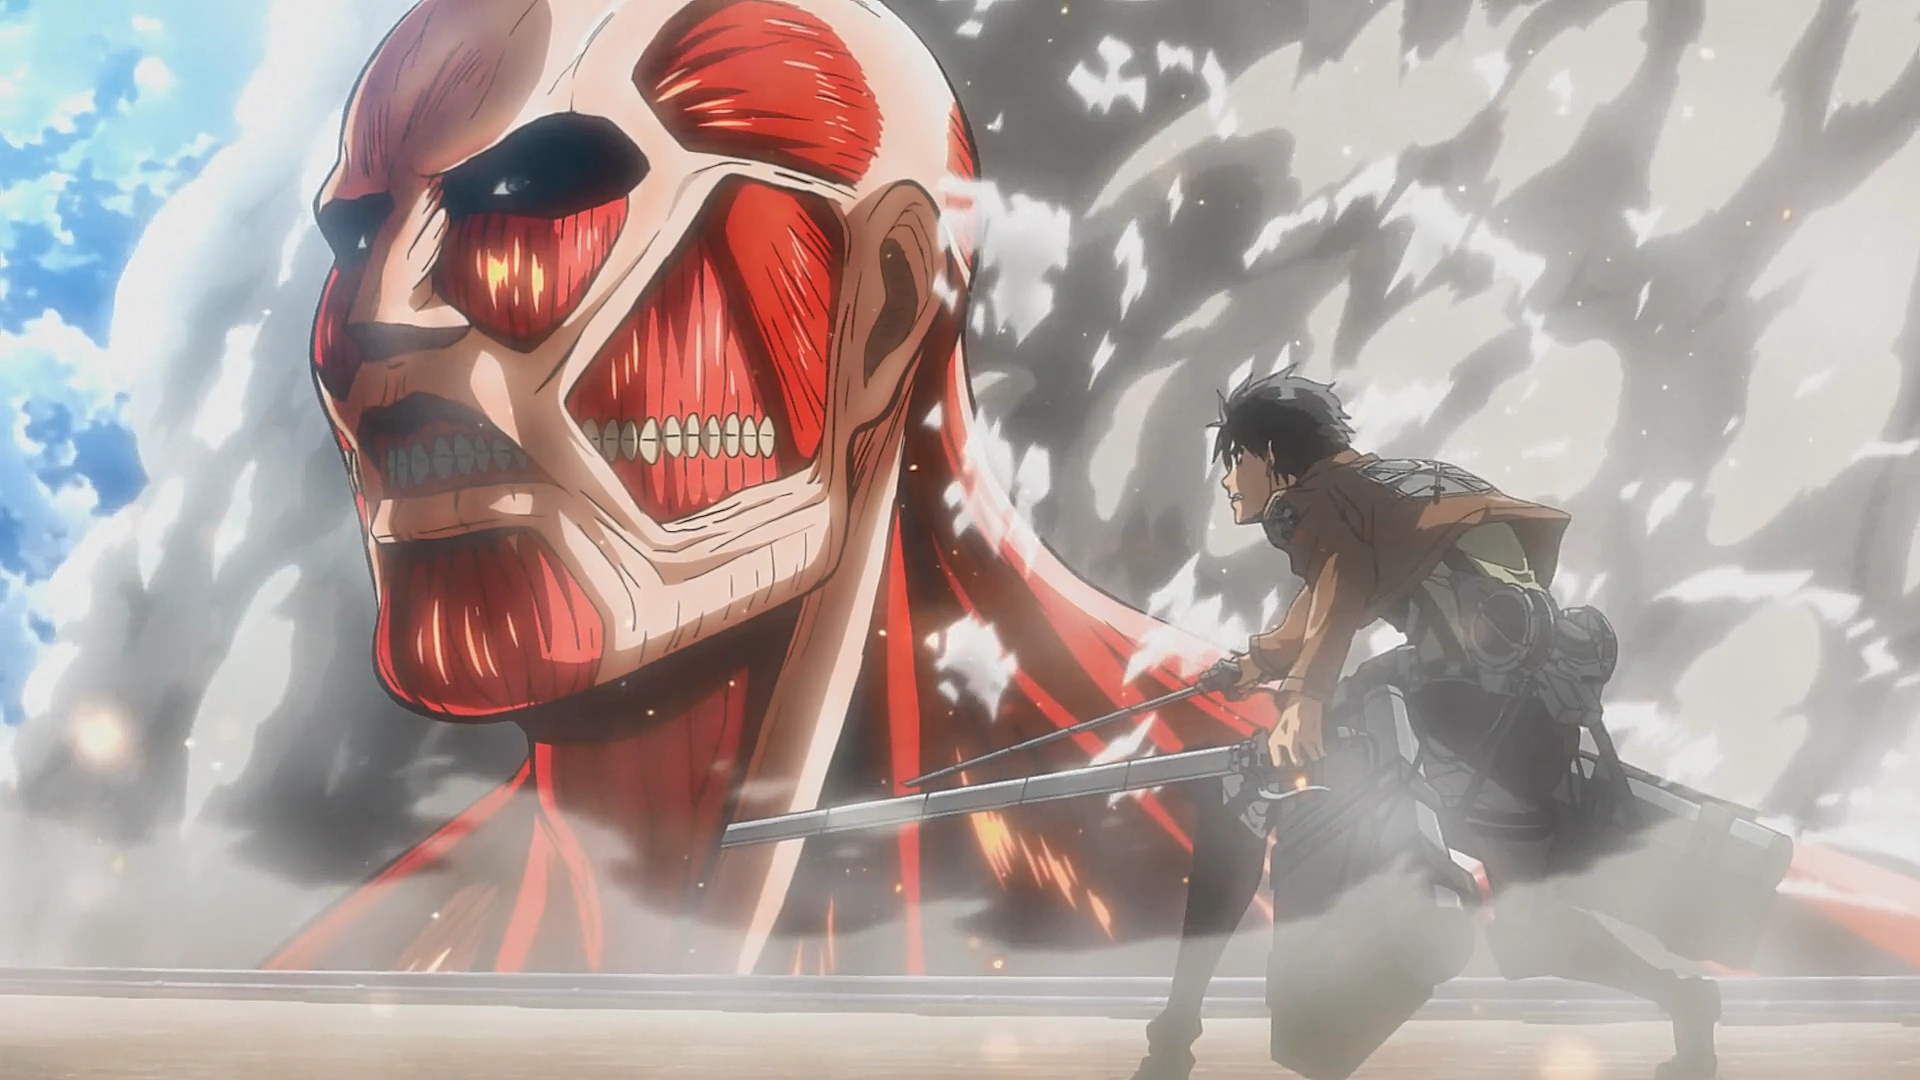 The_Colossal_Titan_appears_once_again